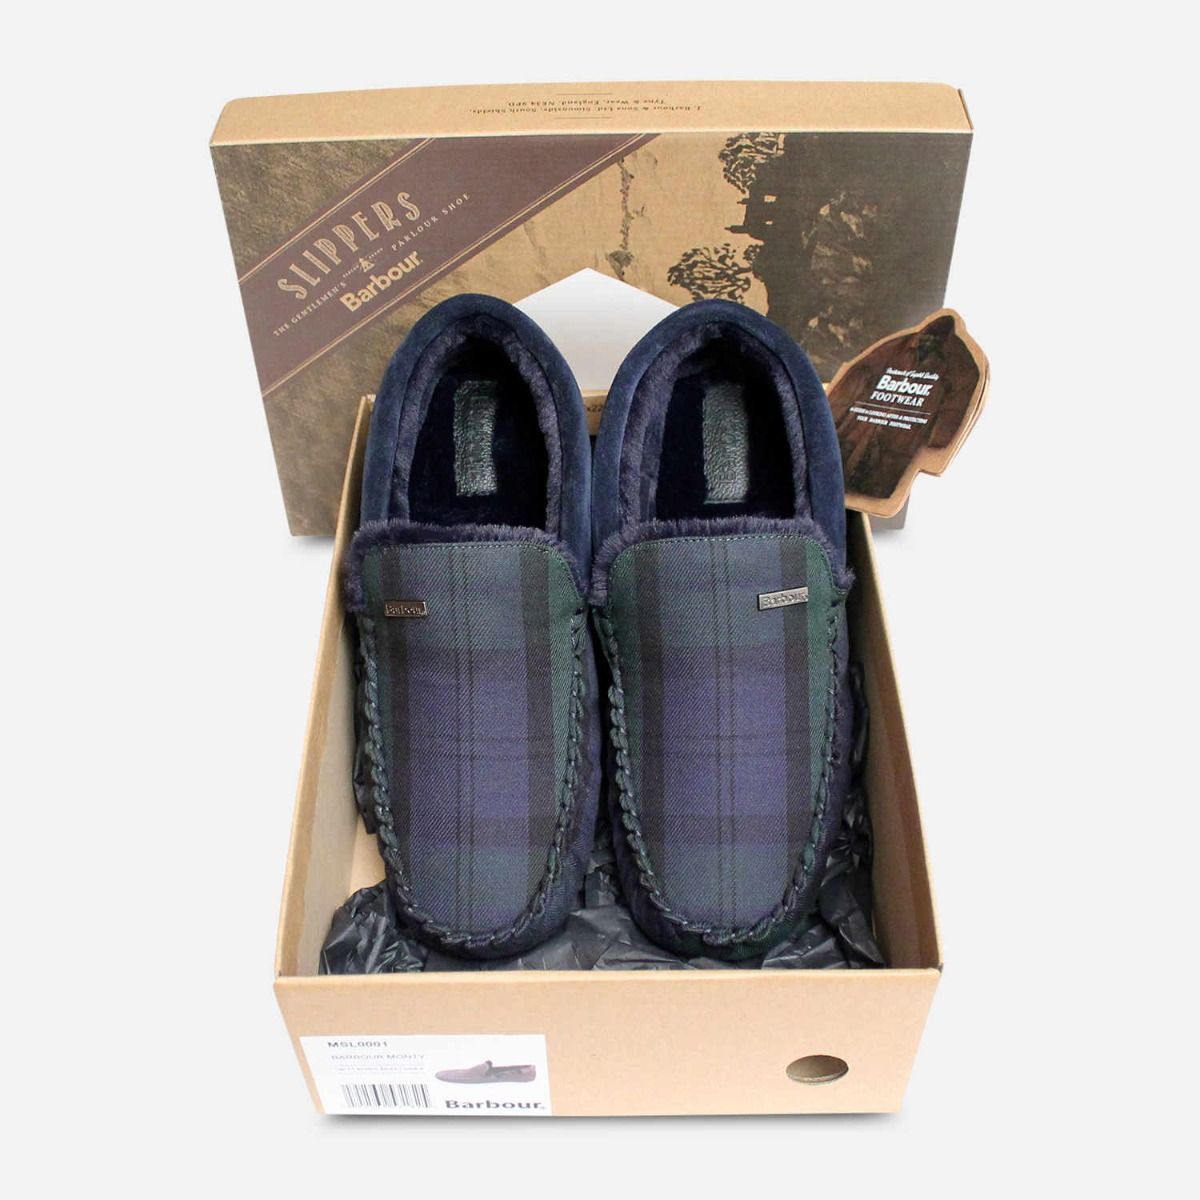 barbour monty mens slippers